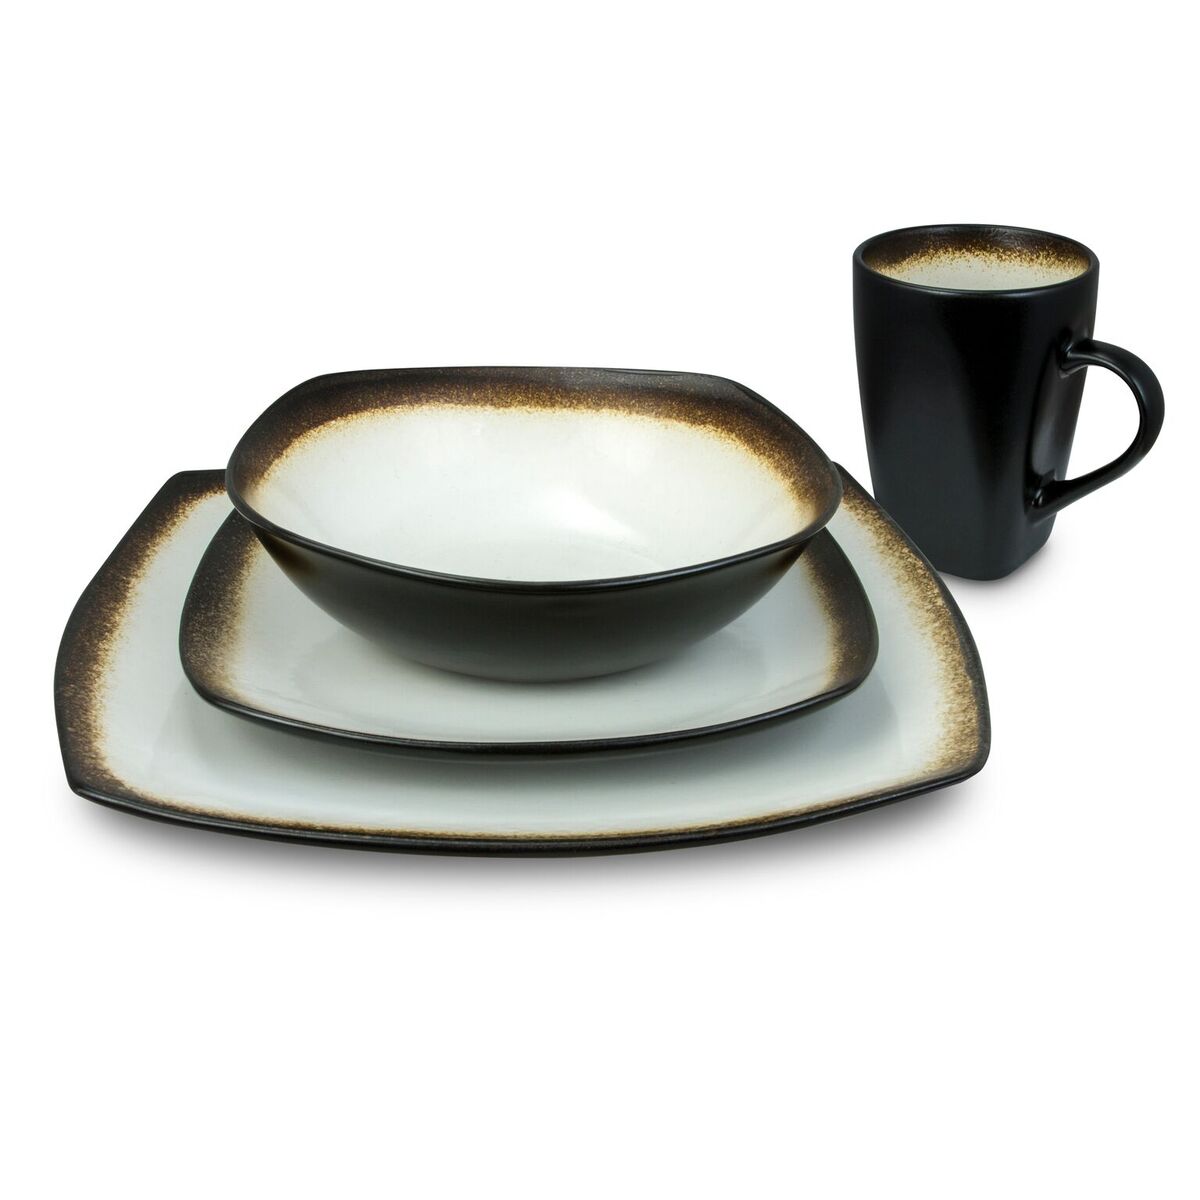 Haus By Kalorik Crt 43703 Bl Haus 16 Piece Brown And White Dinnerware Set - Curved Edges